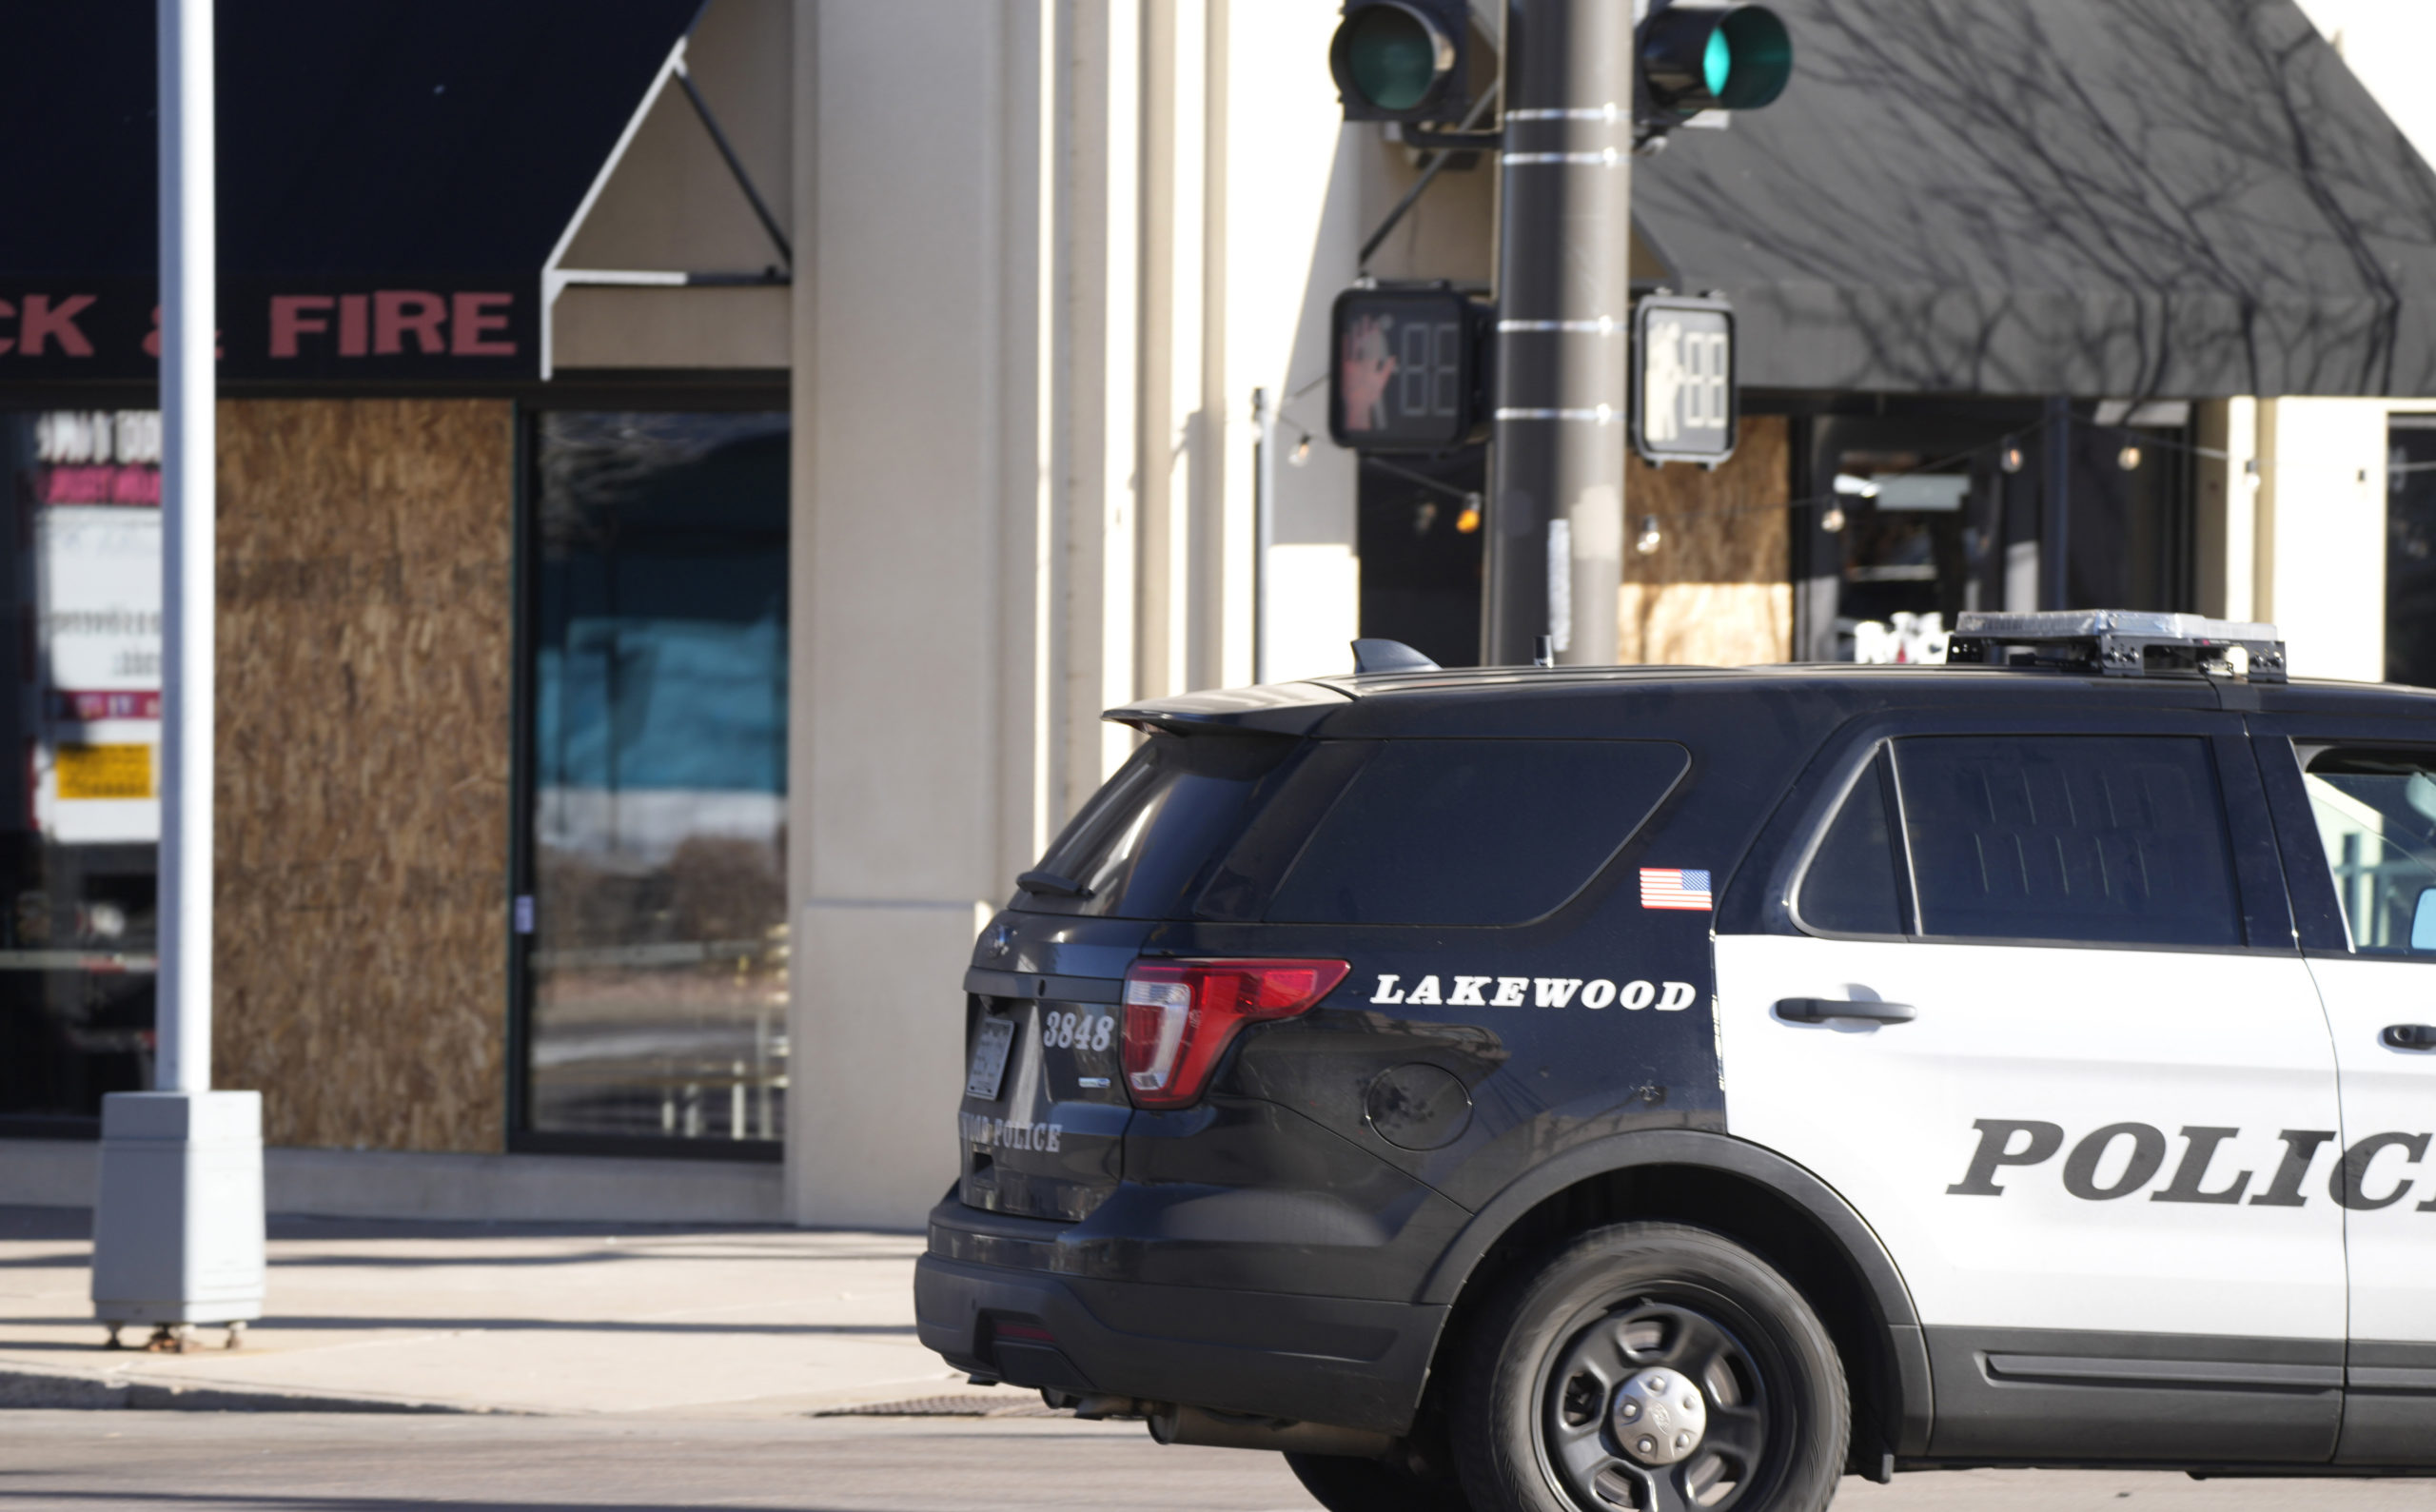 A police vehicle passes through the intersection of Alaska Drive and Vance Street past sheets of pl...